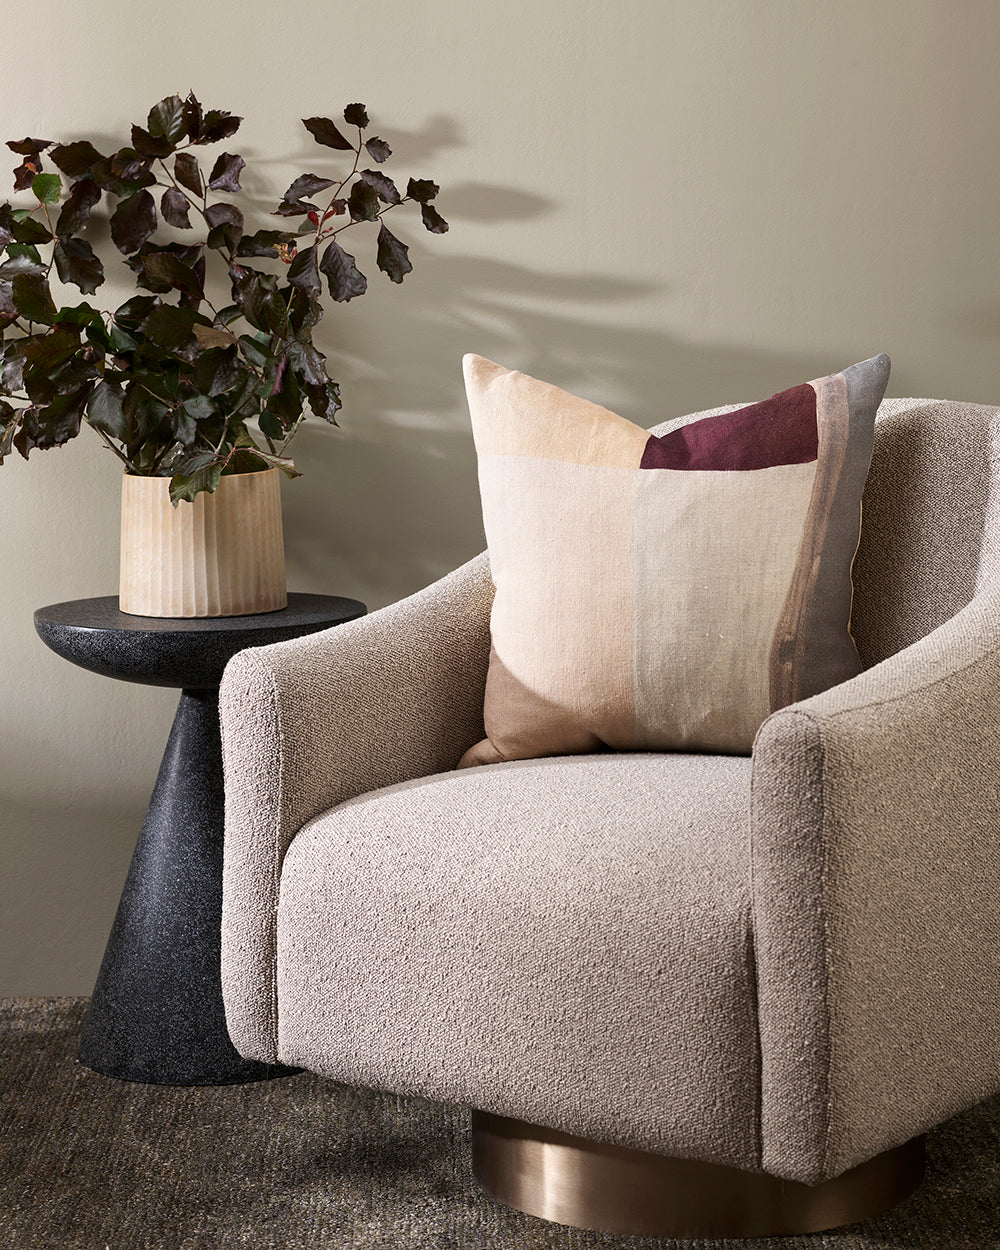 benny cushion from baya with grey, port red, beige and cream brushstrock pattern on a grey boucle fabric chair in cream. Next to it is a round coffee table in dark grey stone with a cream ridged pot with greenery in it